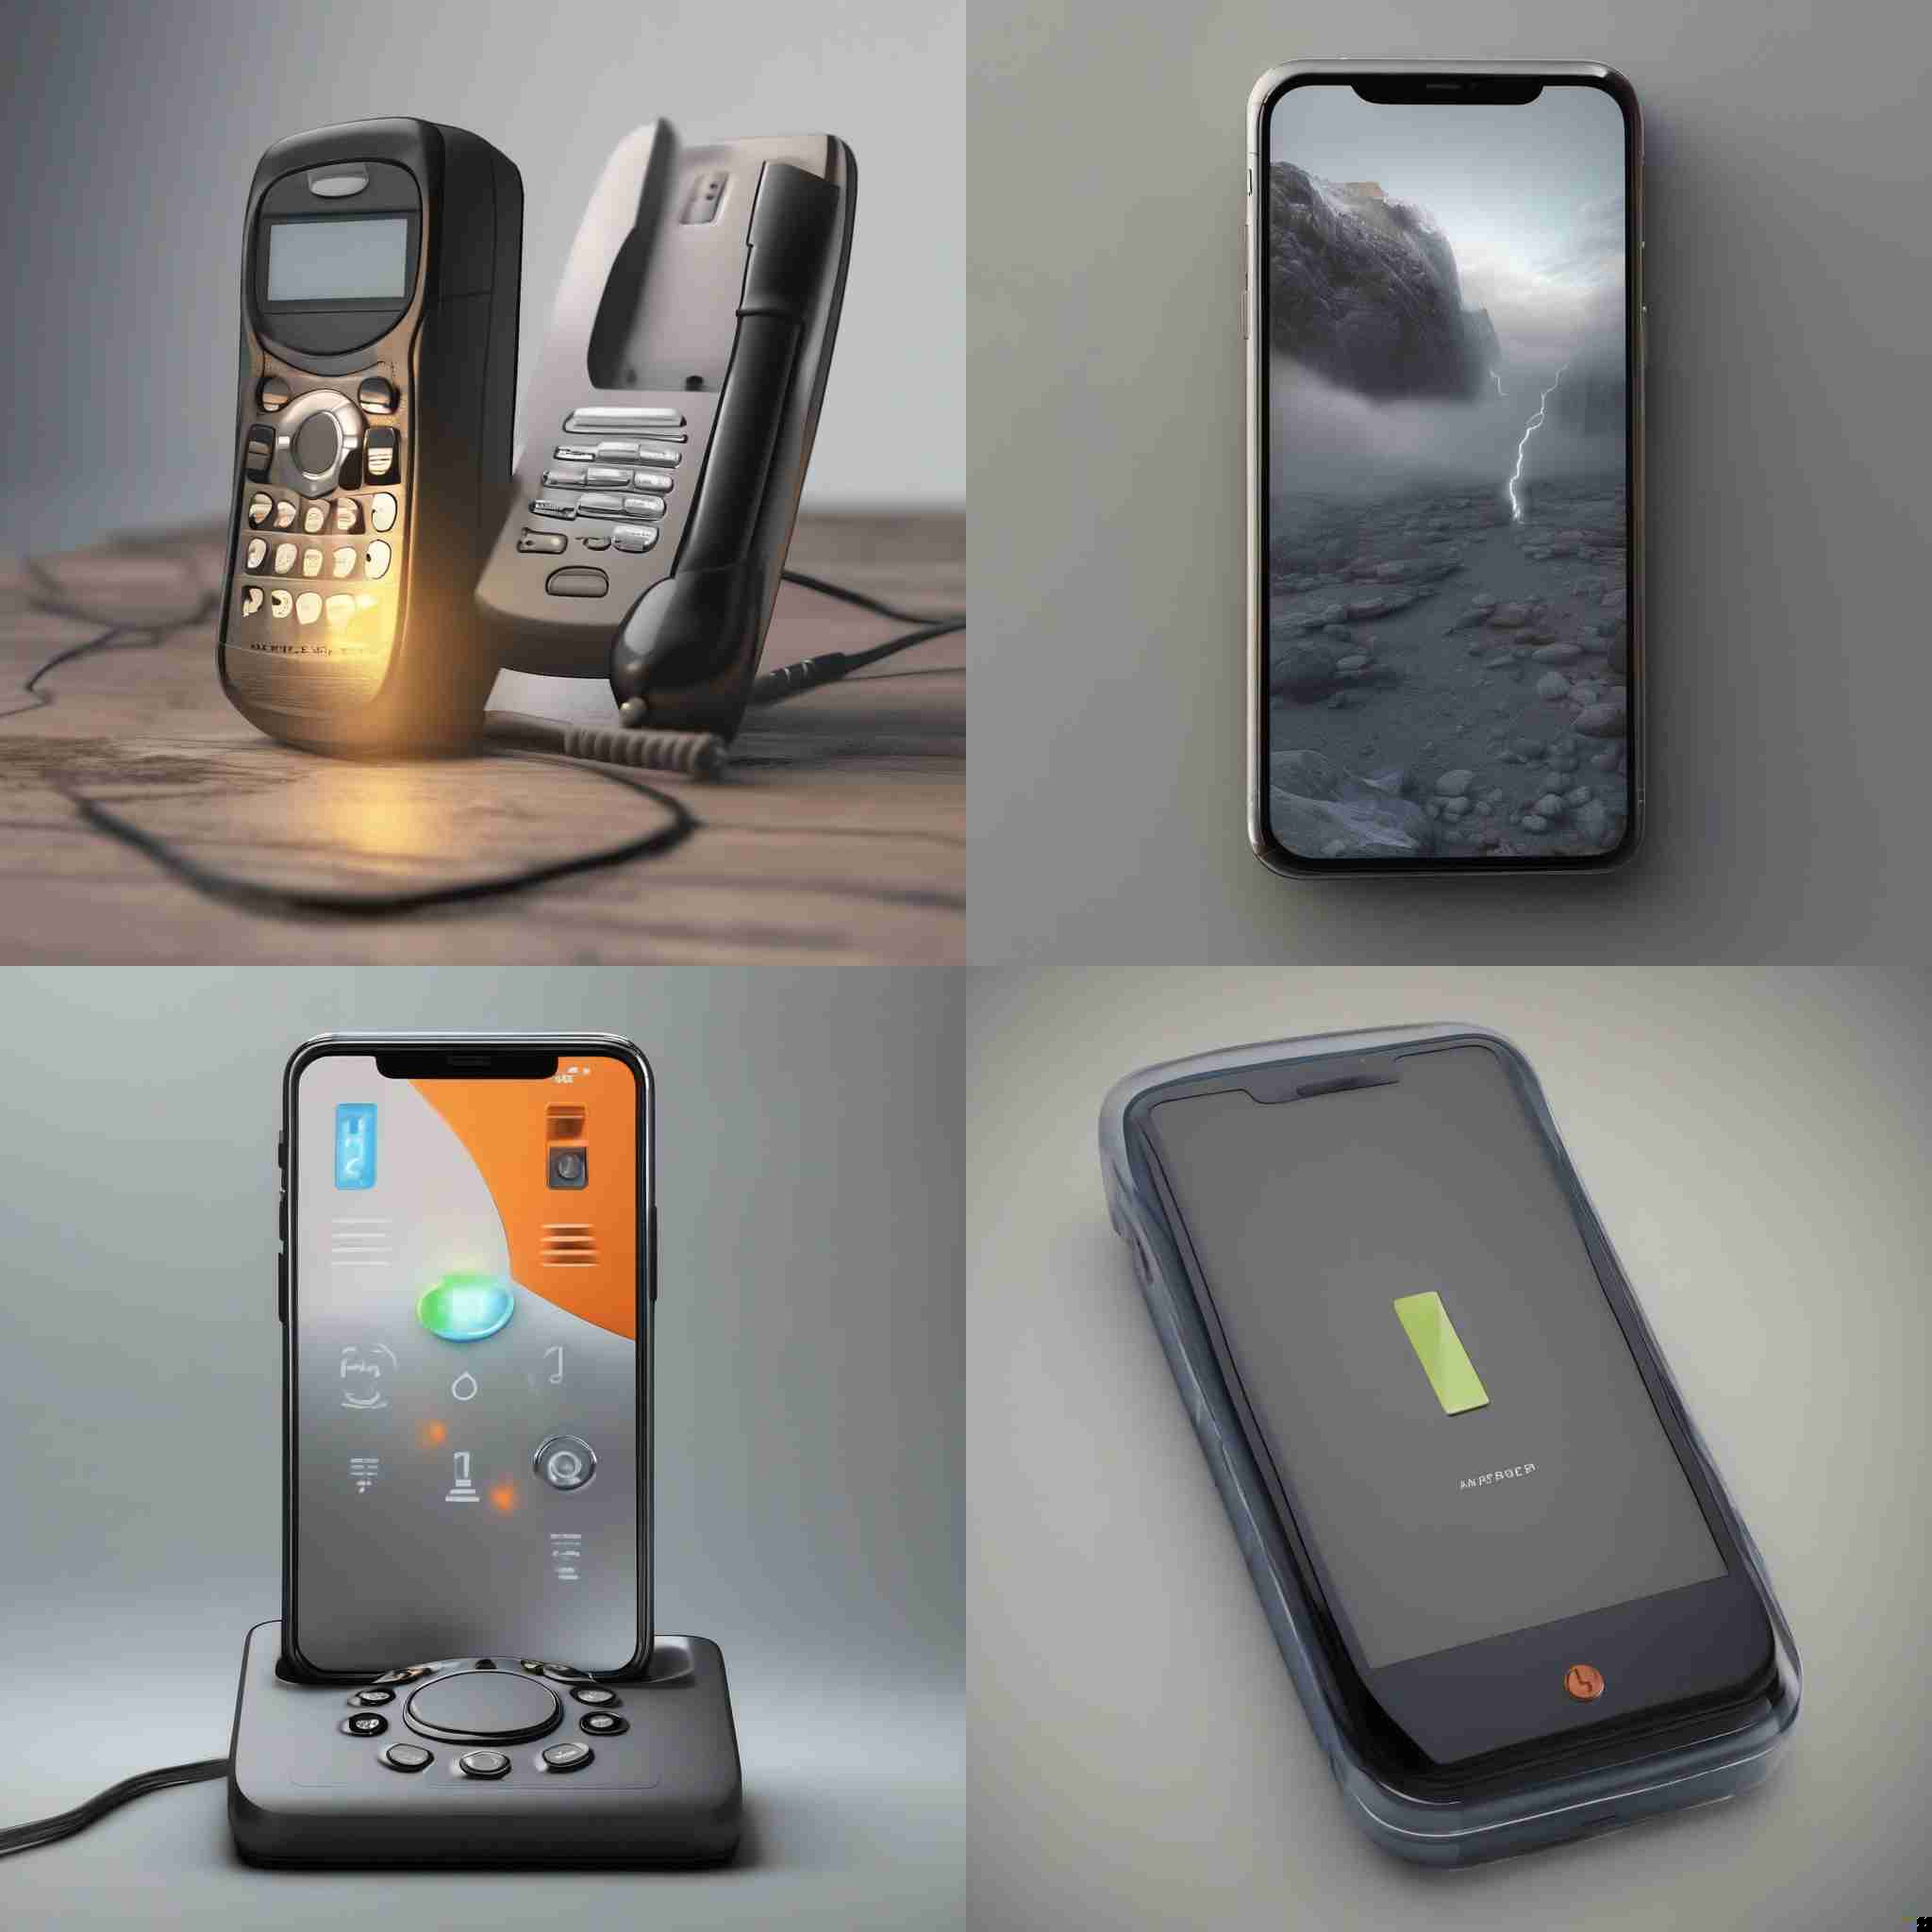 A phone with a fully charged battery